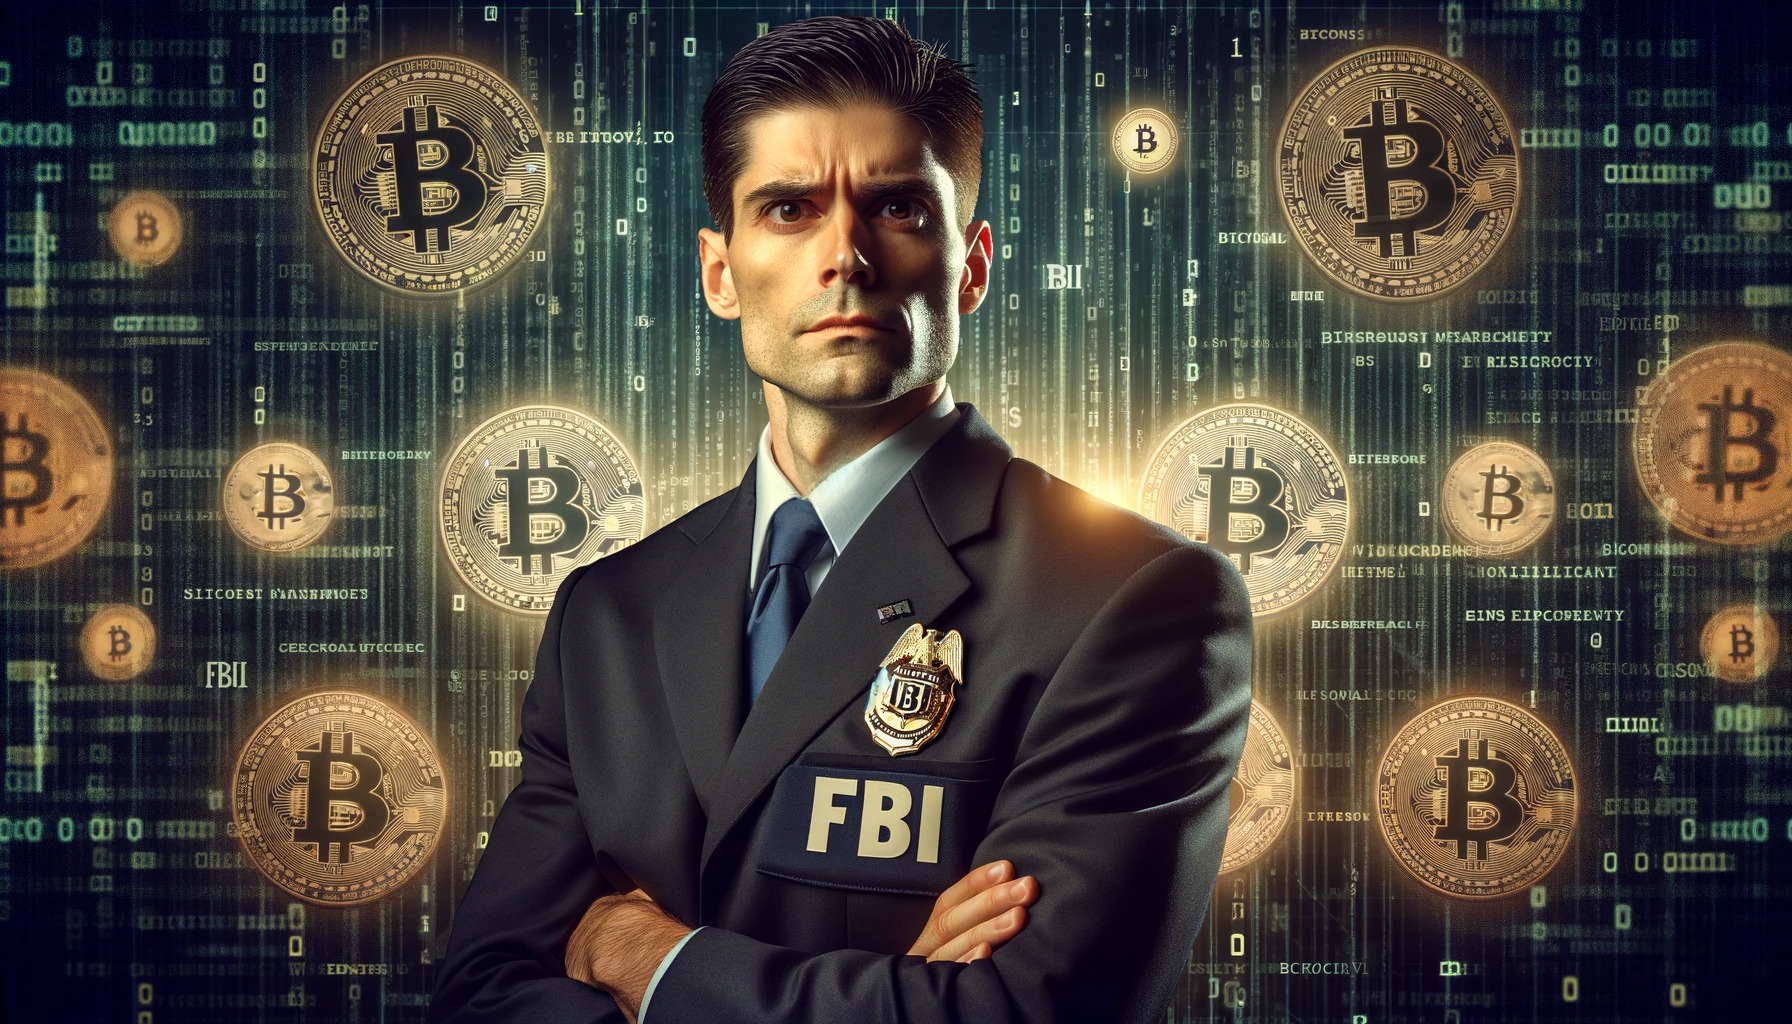 FBI serviceman looking directly at the camera, set against a backdrop of Bitcoin symbols